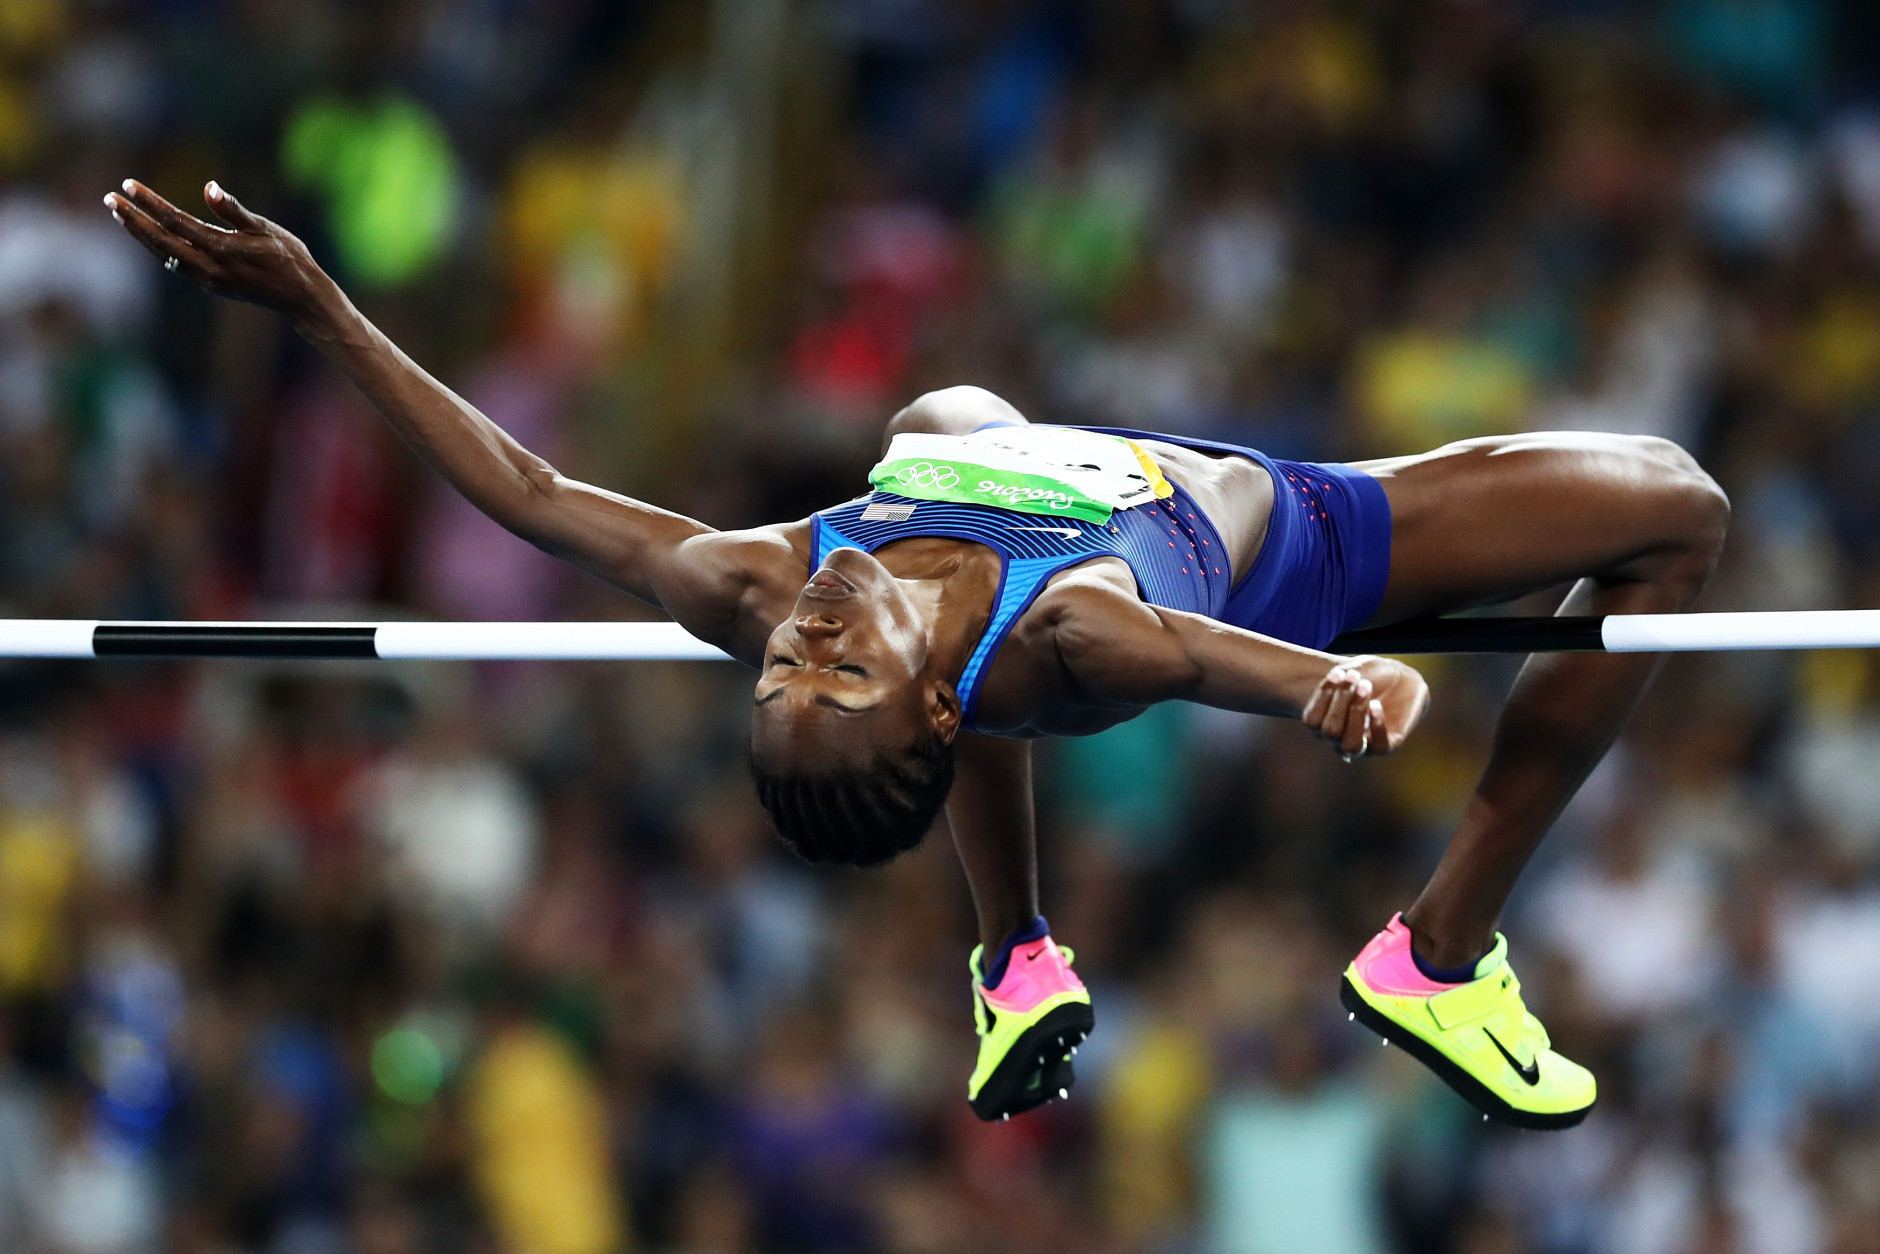 RIO DE JANEIRO, BRAZIL - AUGUST 20:  Chaunte Lowe of the United States competes in the Women's High Jump final on Day 15 of the Rio 2016 Olympic Games at the Olympic Stadium on August 20, 2016 in Rio de Janeiro, Brazil.  (Photo by Ezra Shaw/Getty Images)